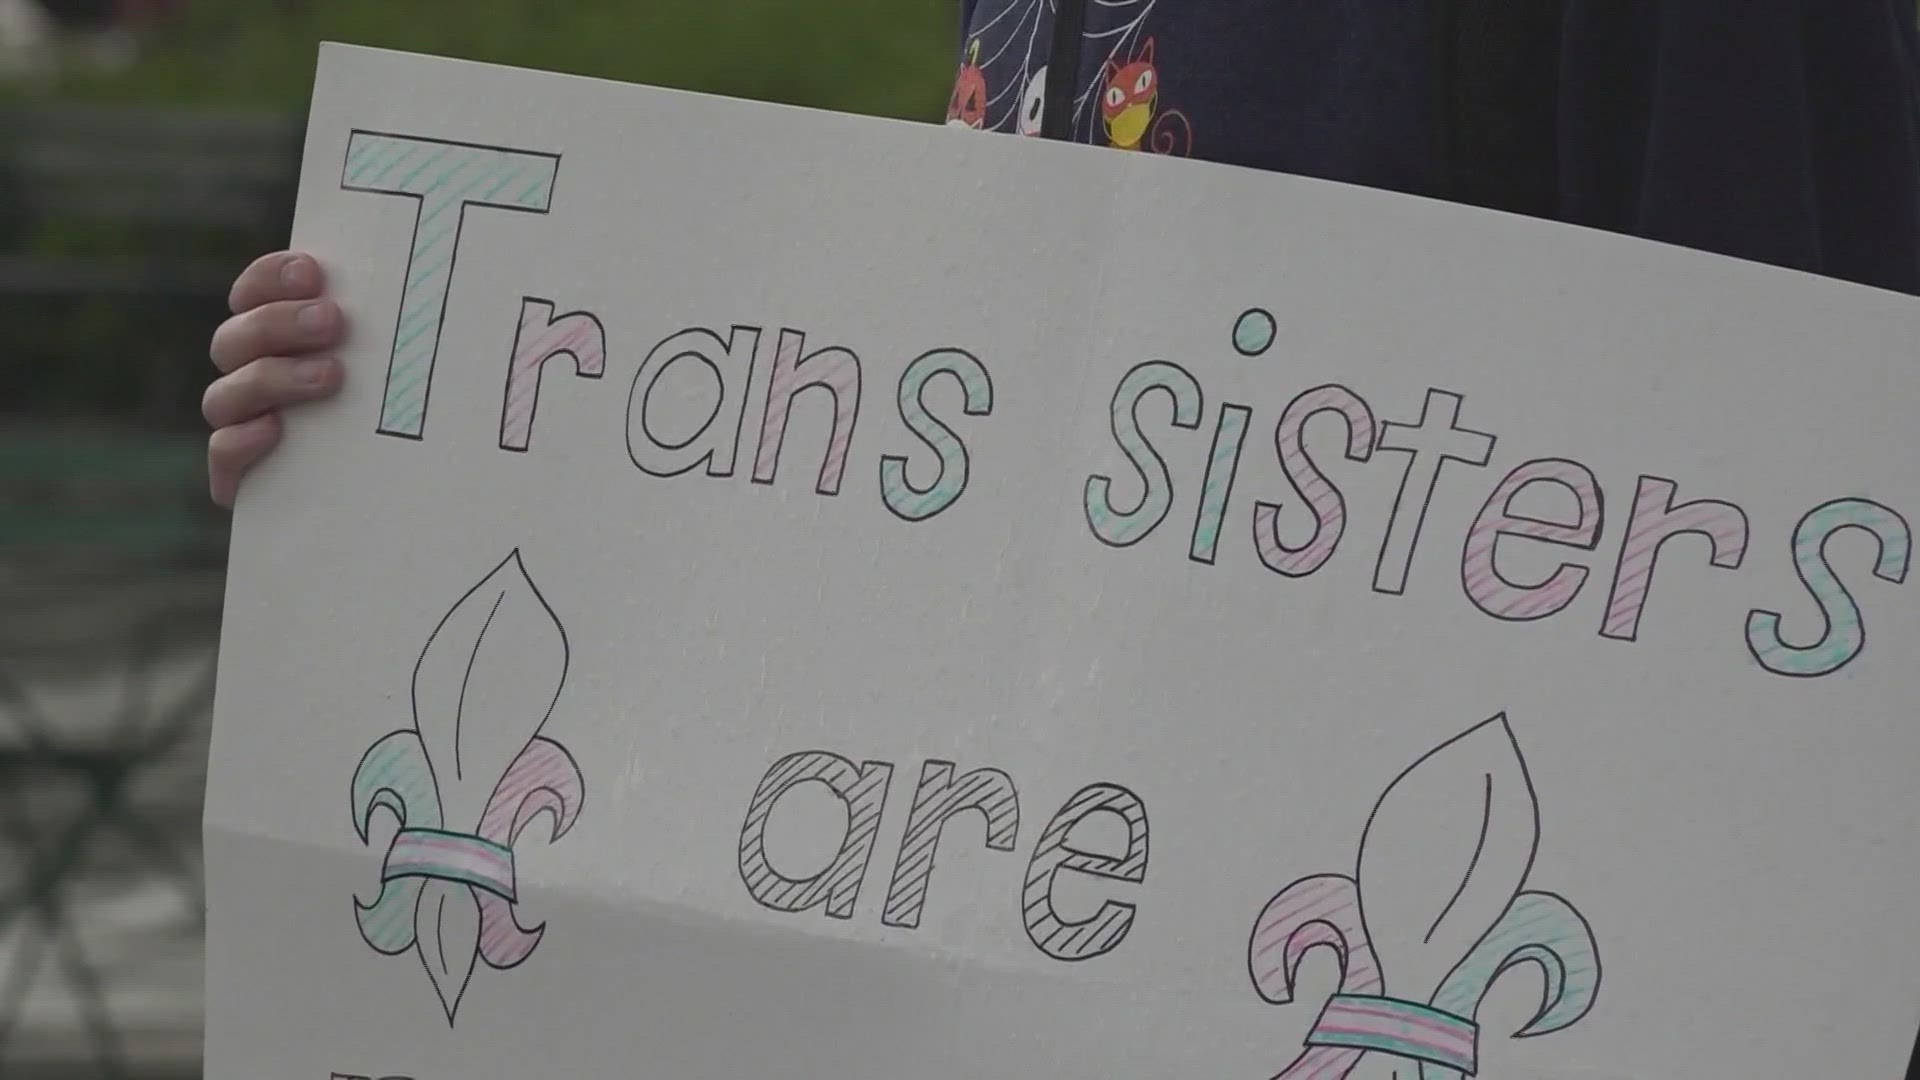 The ban includes exceptions for minors already getting such treatments. The House also approved a bill to ban transgender girls and women from female sports teams.